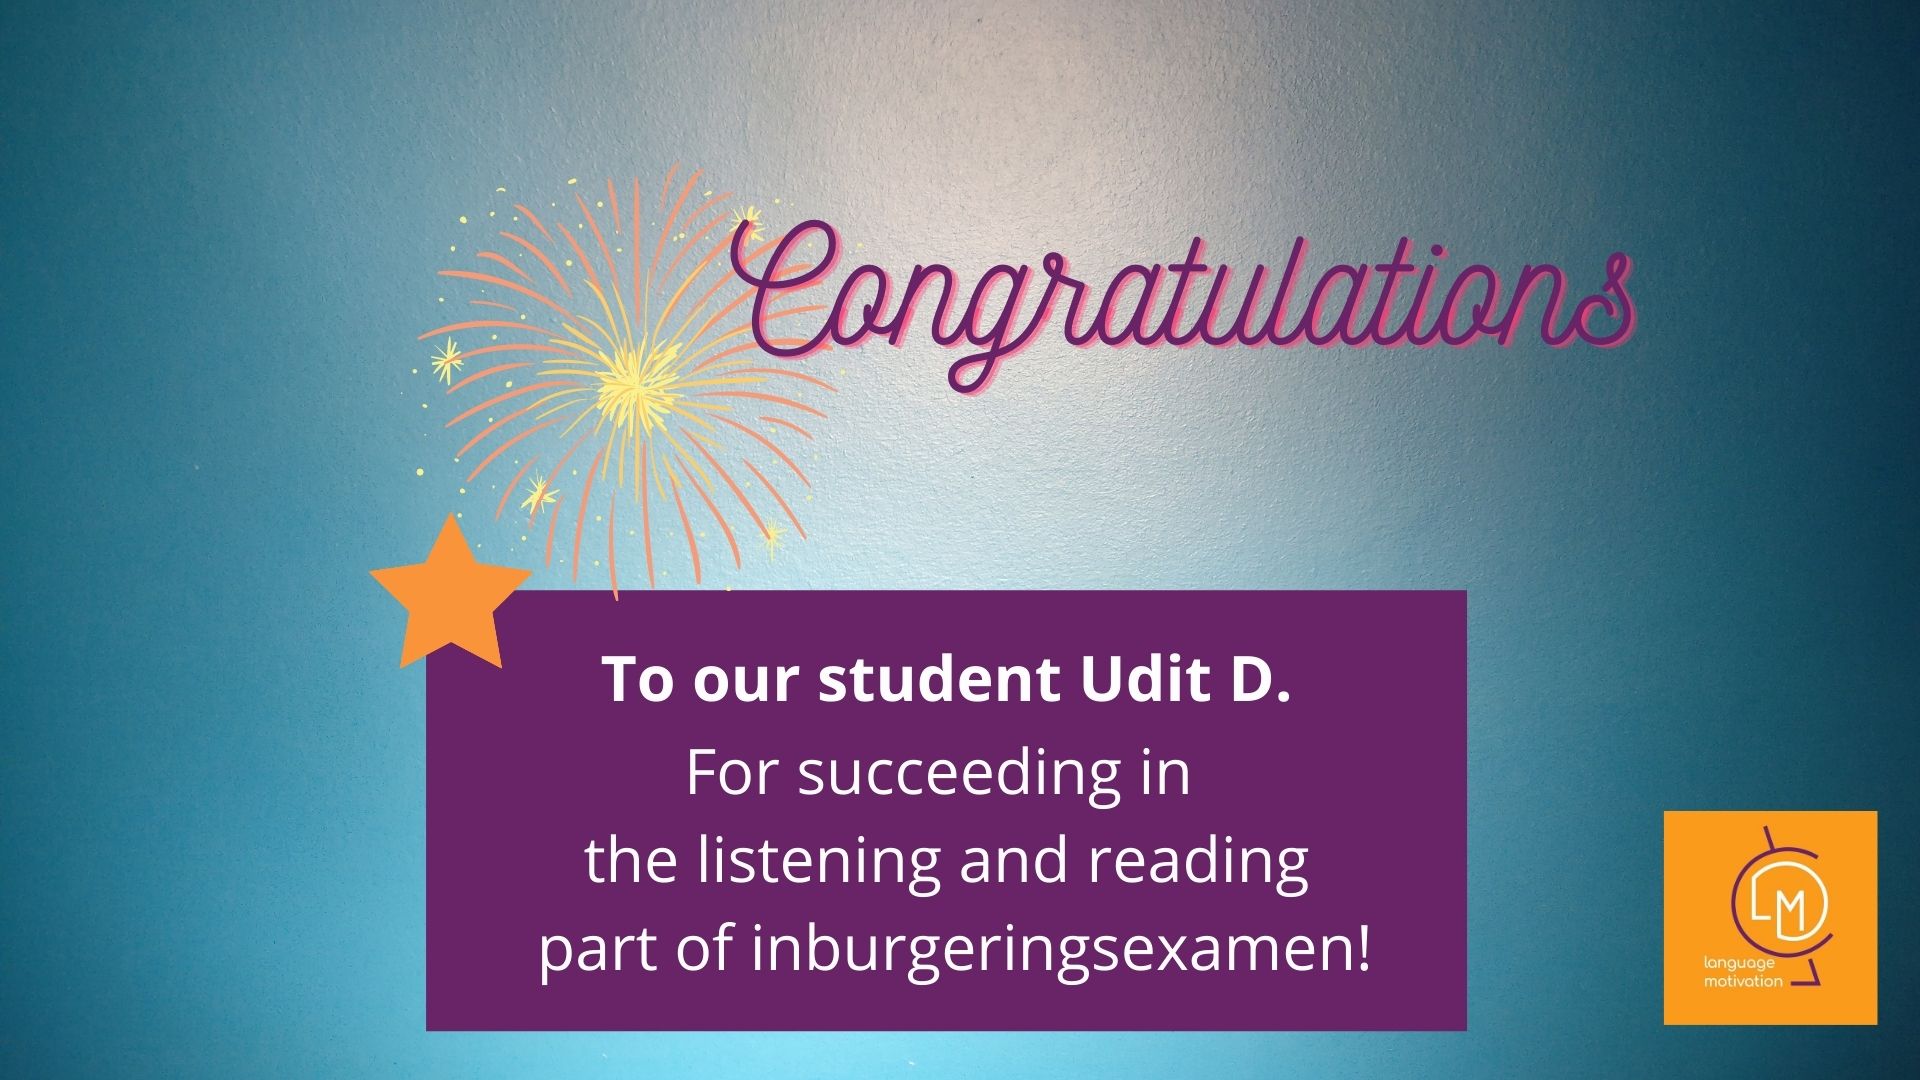 congrats to udit